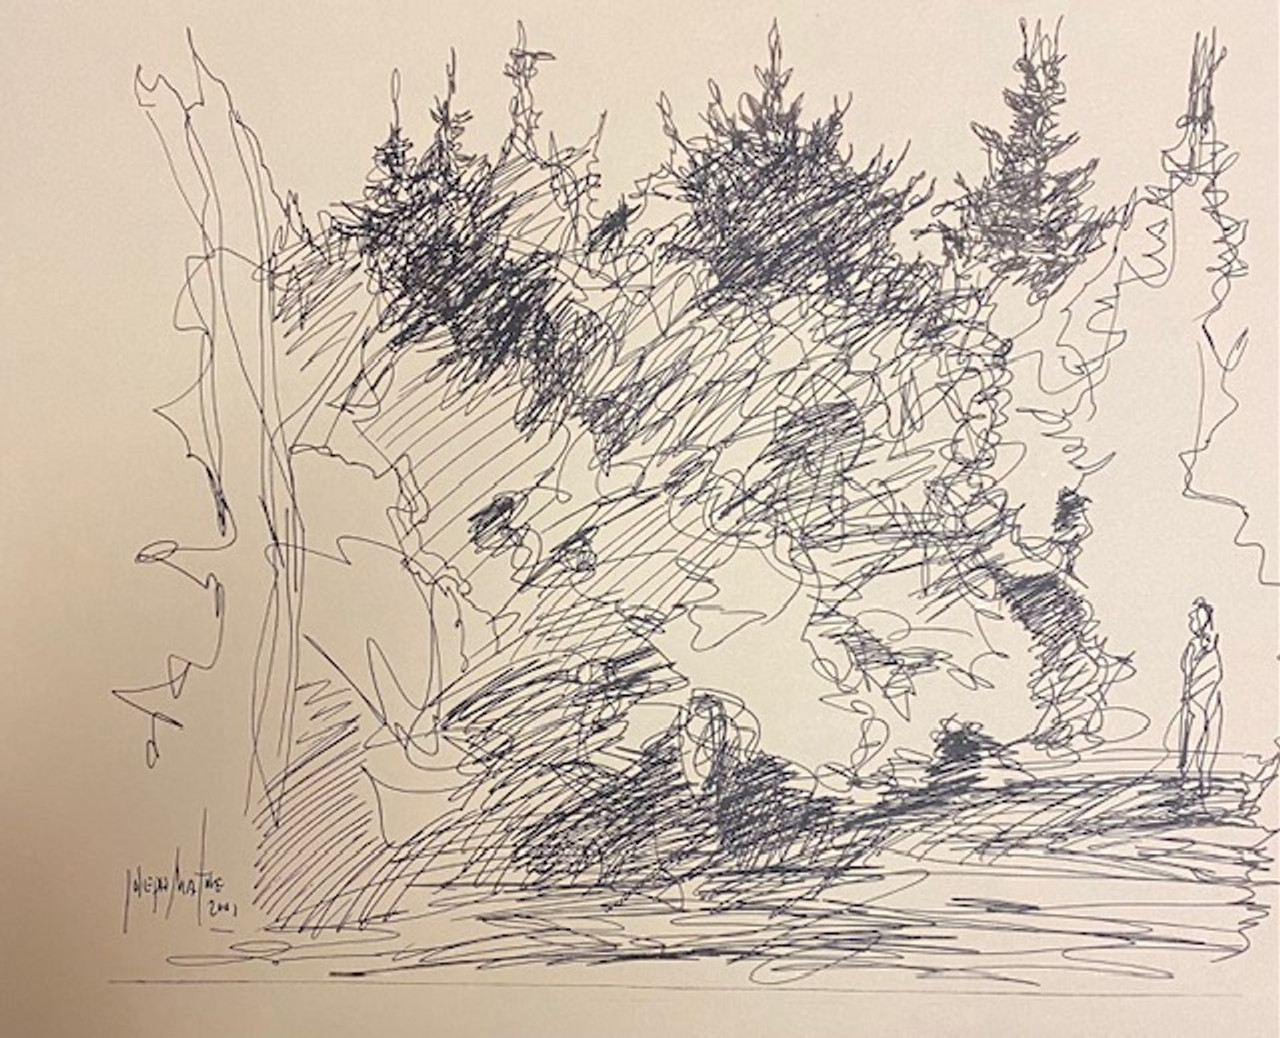 Forest sketch by Joseph Matose 8"x 11"